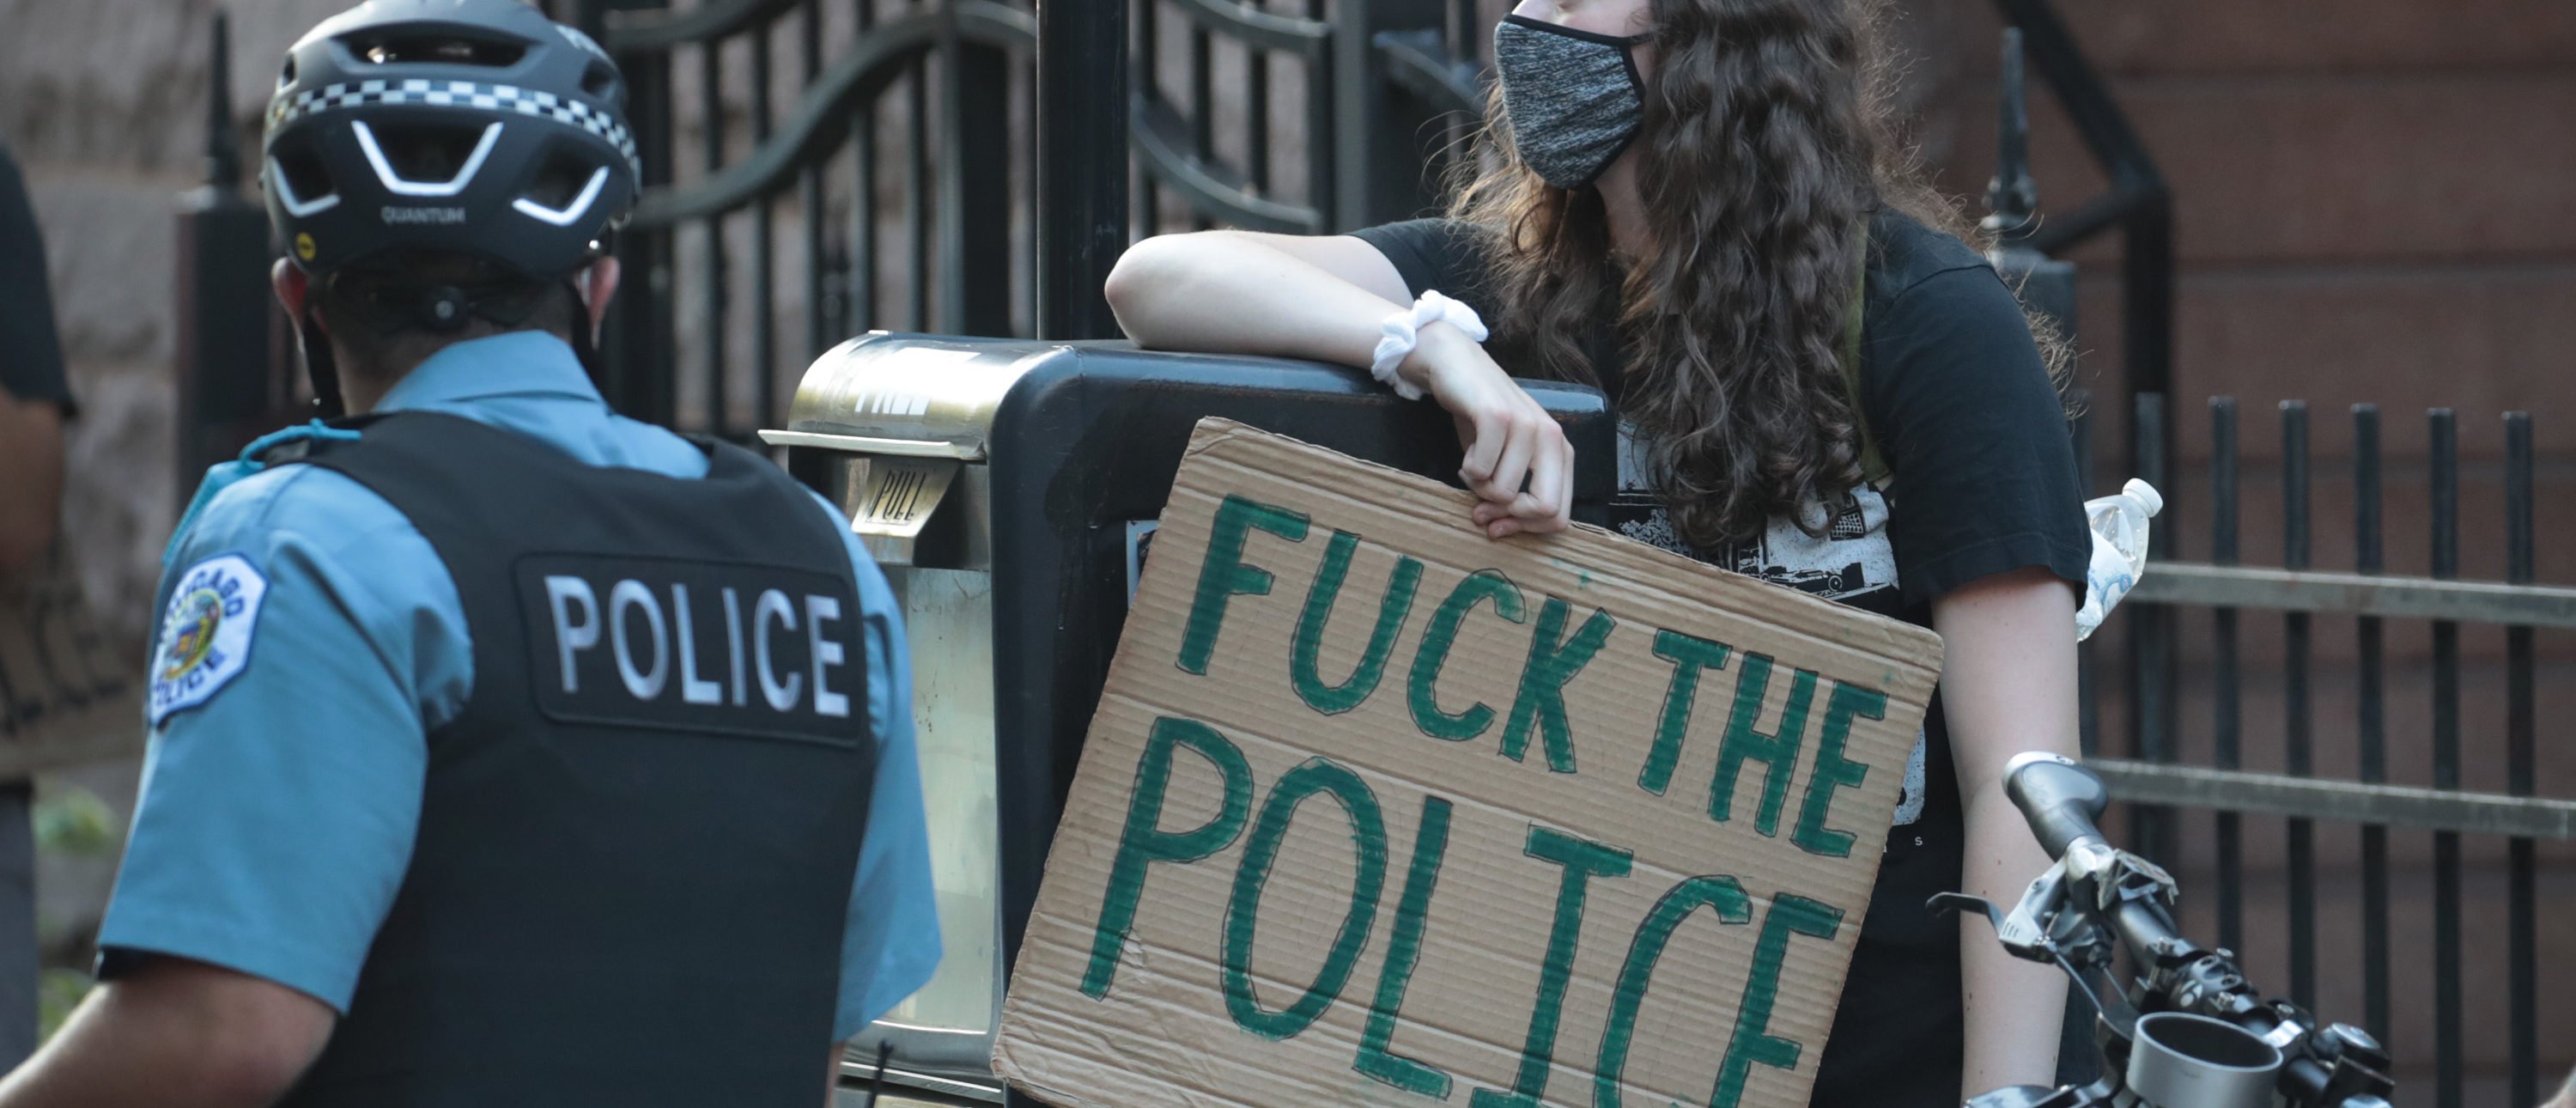 CHICAGO, ILLINOIS - JULY 10: Chicago police prevent demonstrators from reaching the private residence of Illinois Governor J.B. Pritzker on July 10, 2020 in Chicago, Illinois. Demonstrators stage a protest against police torture and demanded for Governor Pritzker to release all police torture survivors and the wrongfully convicted. (Photo by Scott Olson/Getty Images)